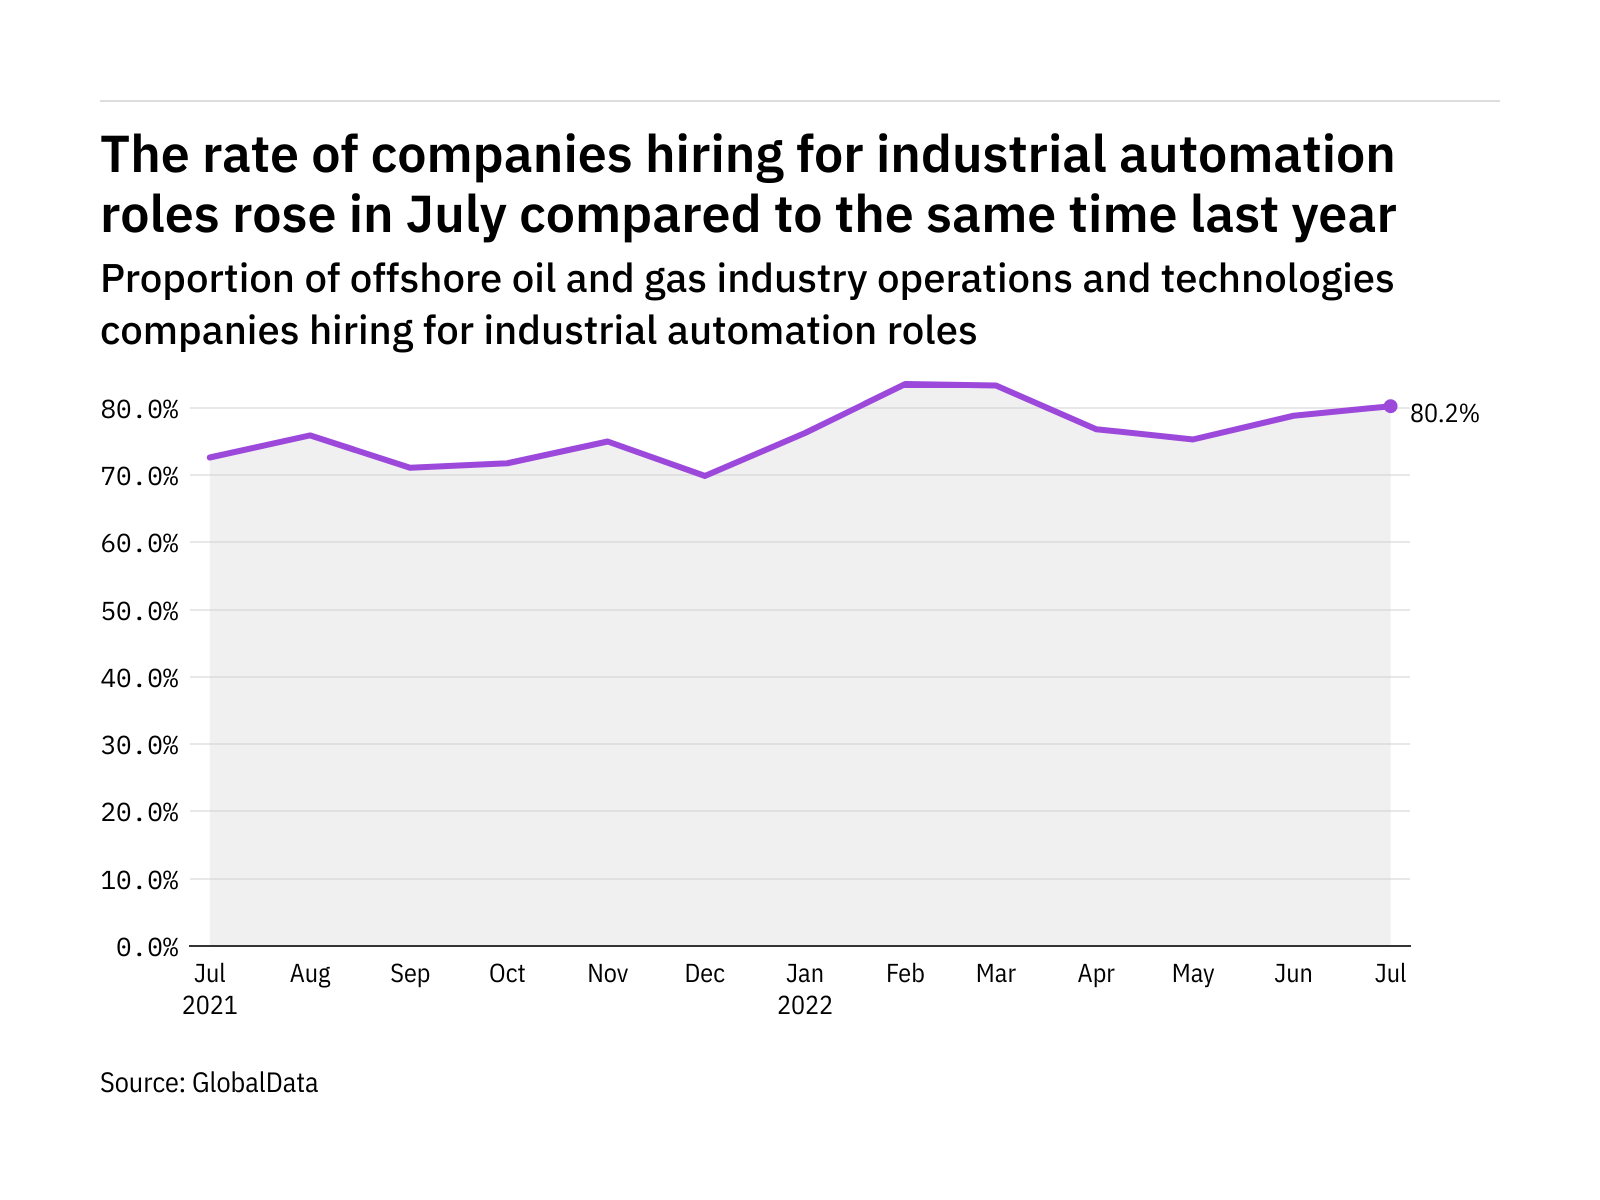 Industrial automation hiring levels in the offshore industry rose in July 2022